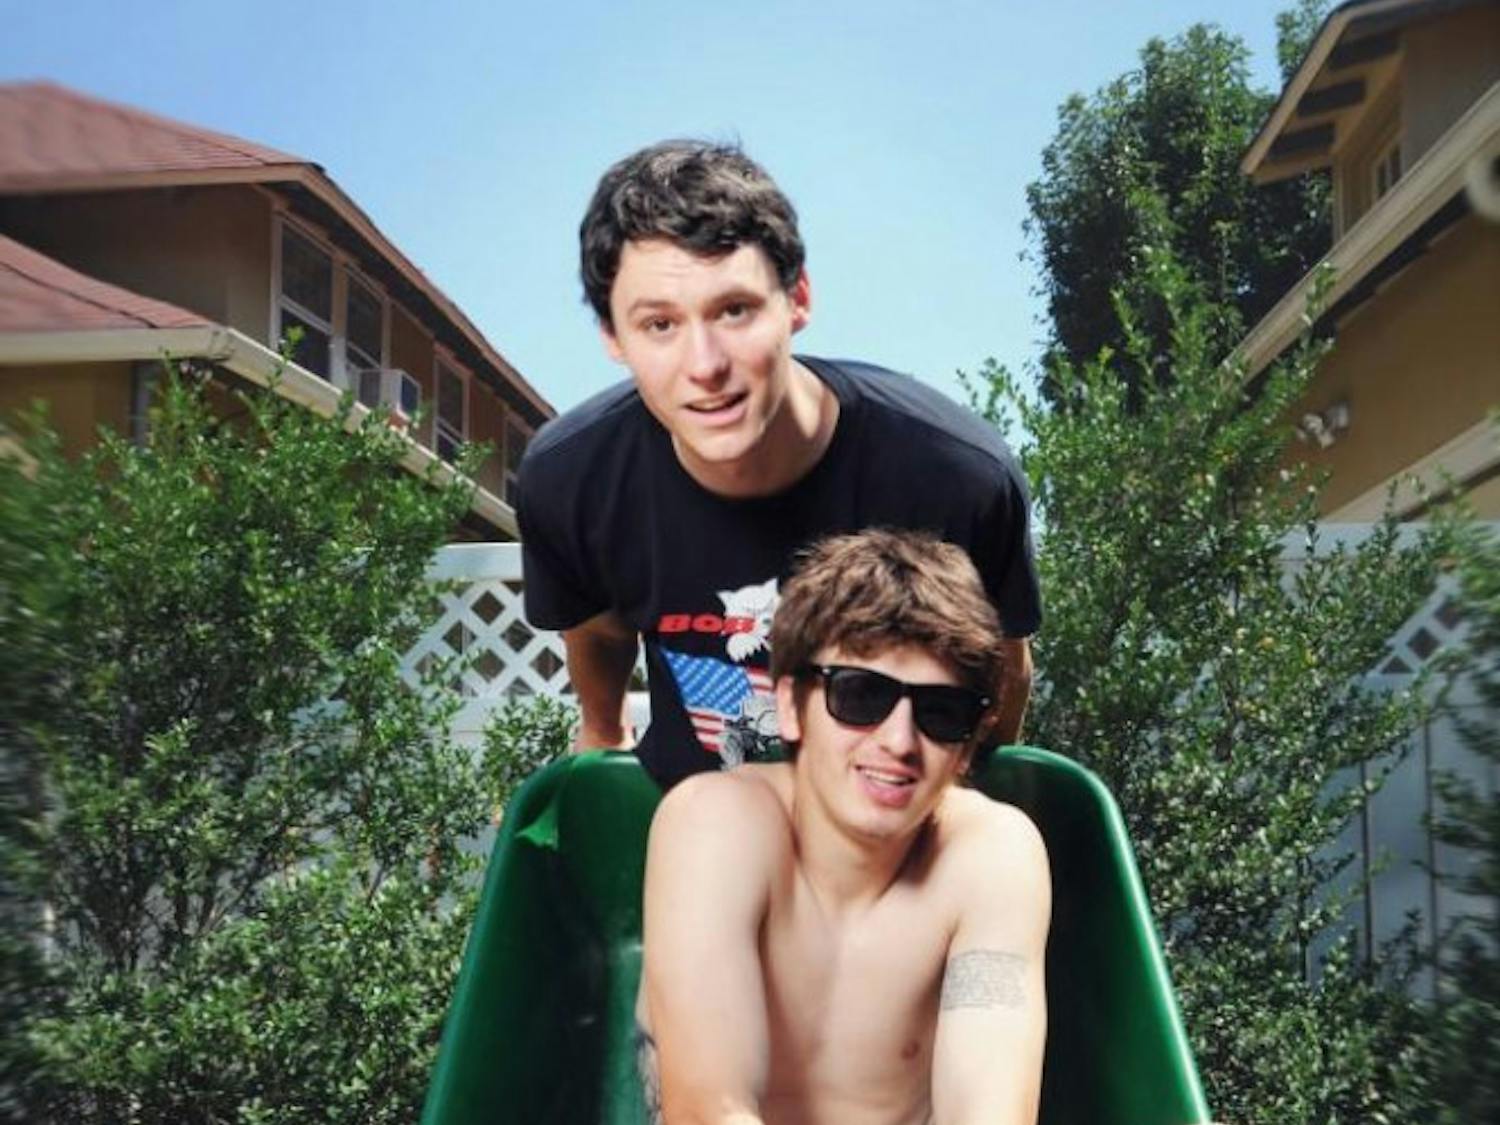 thefrontbottoms